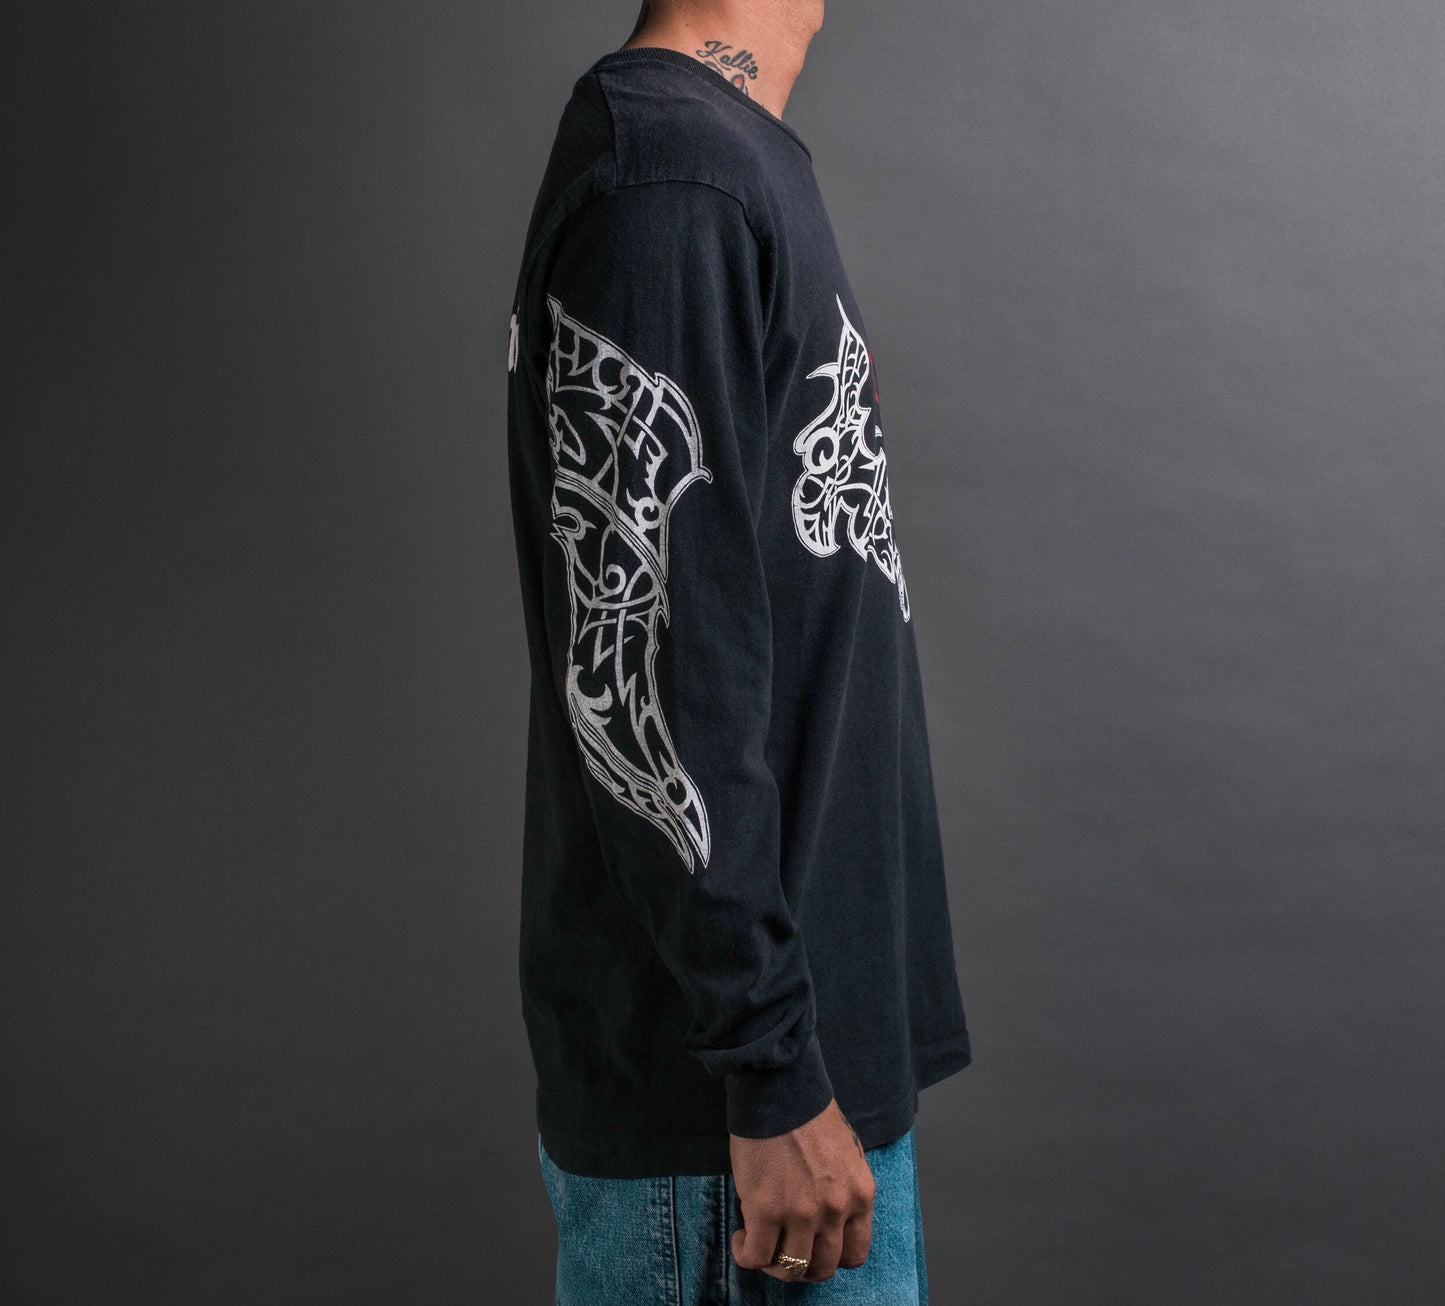 Vintage 90’s The Obsessed Lunar Womb Longsleeve